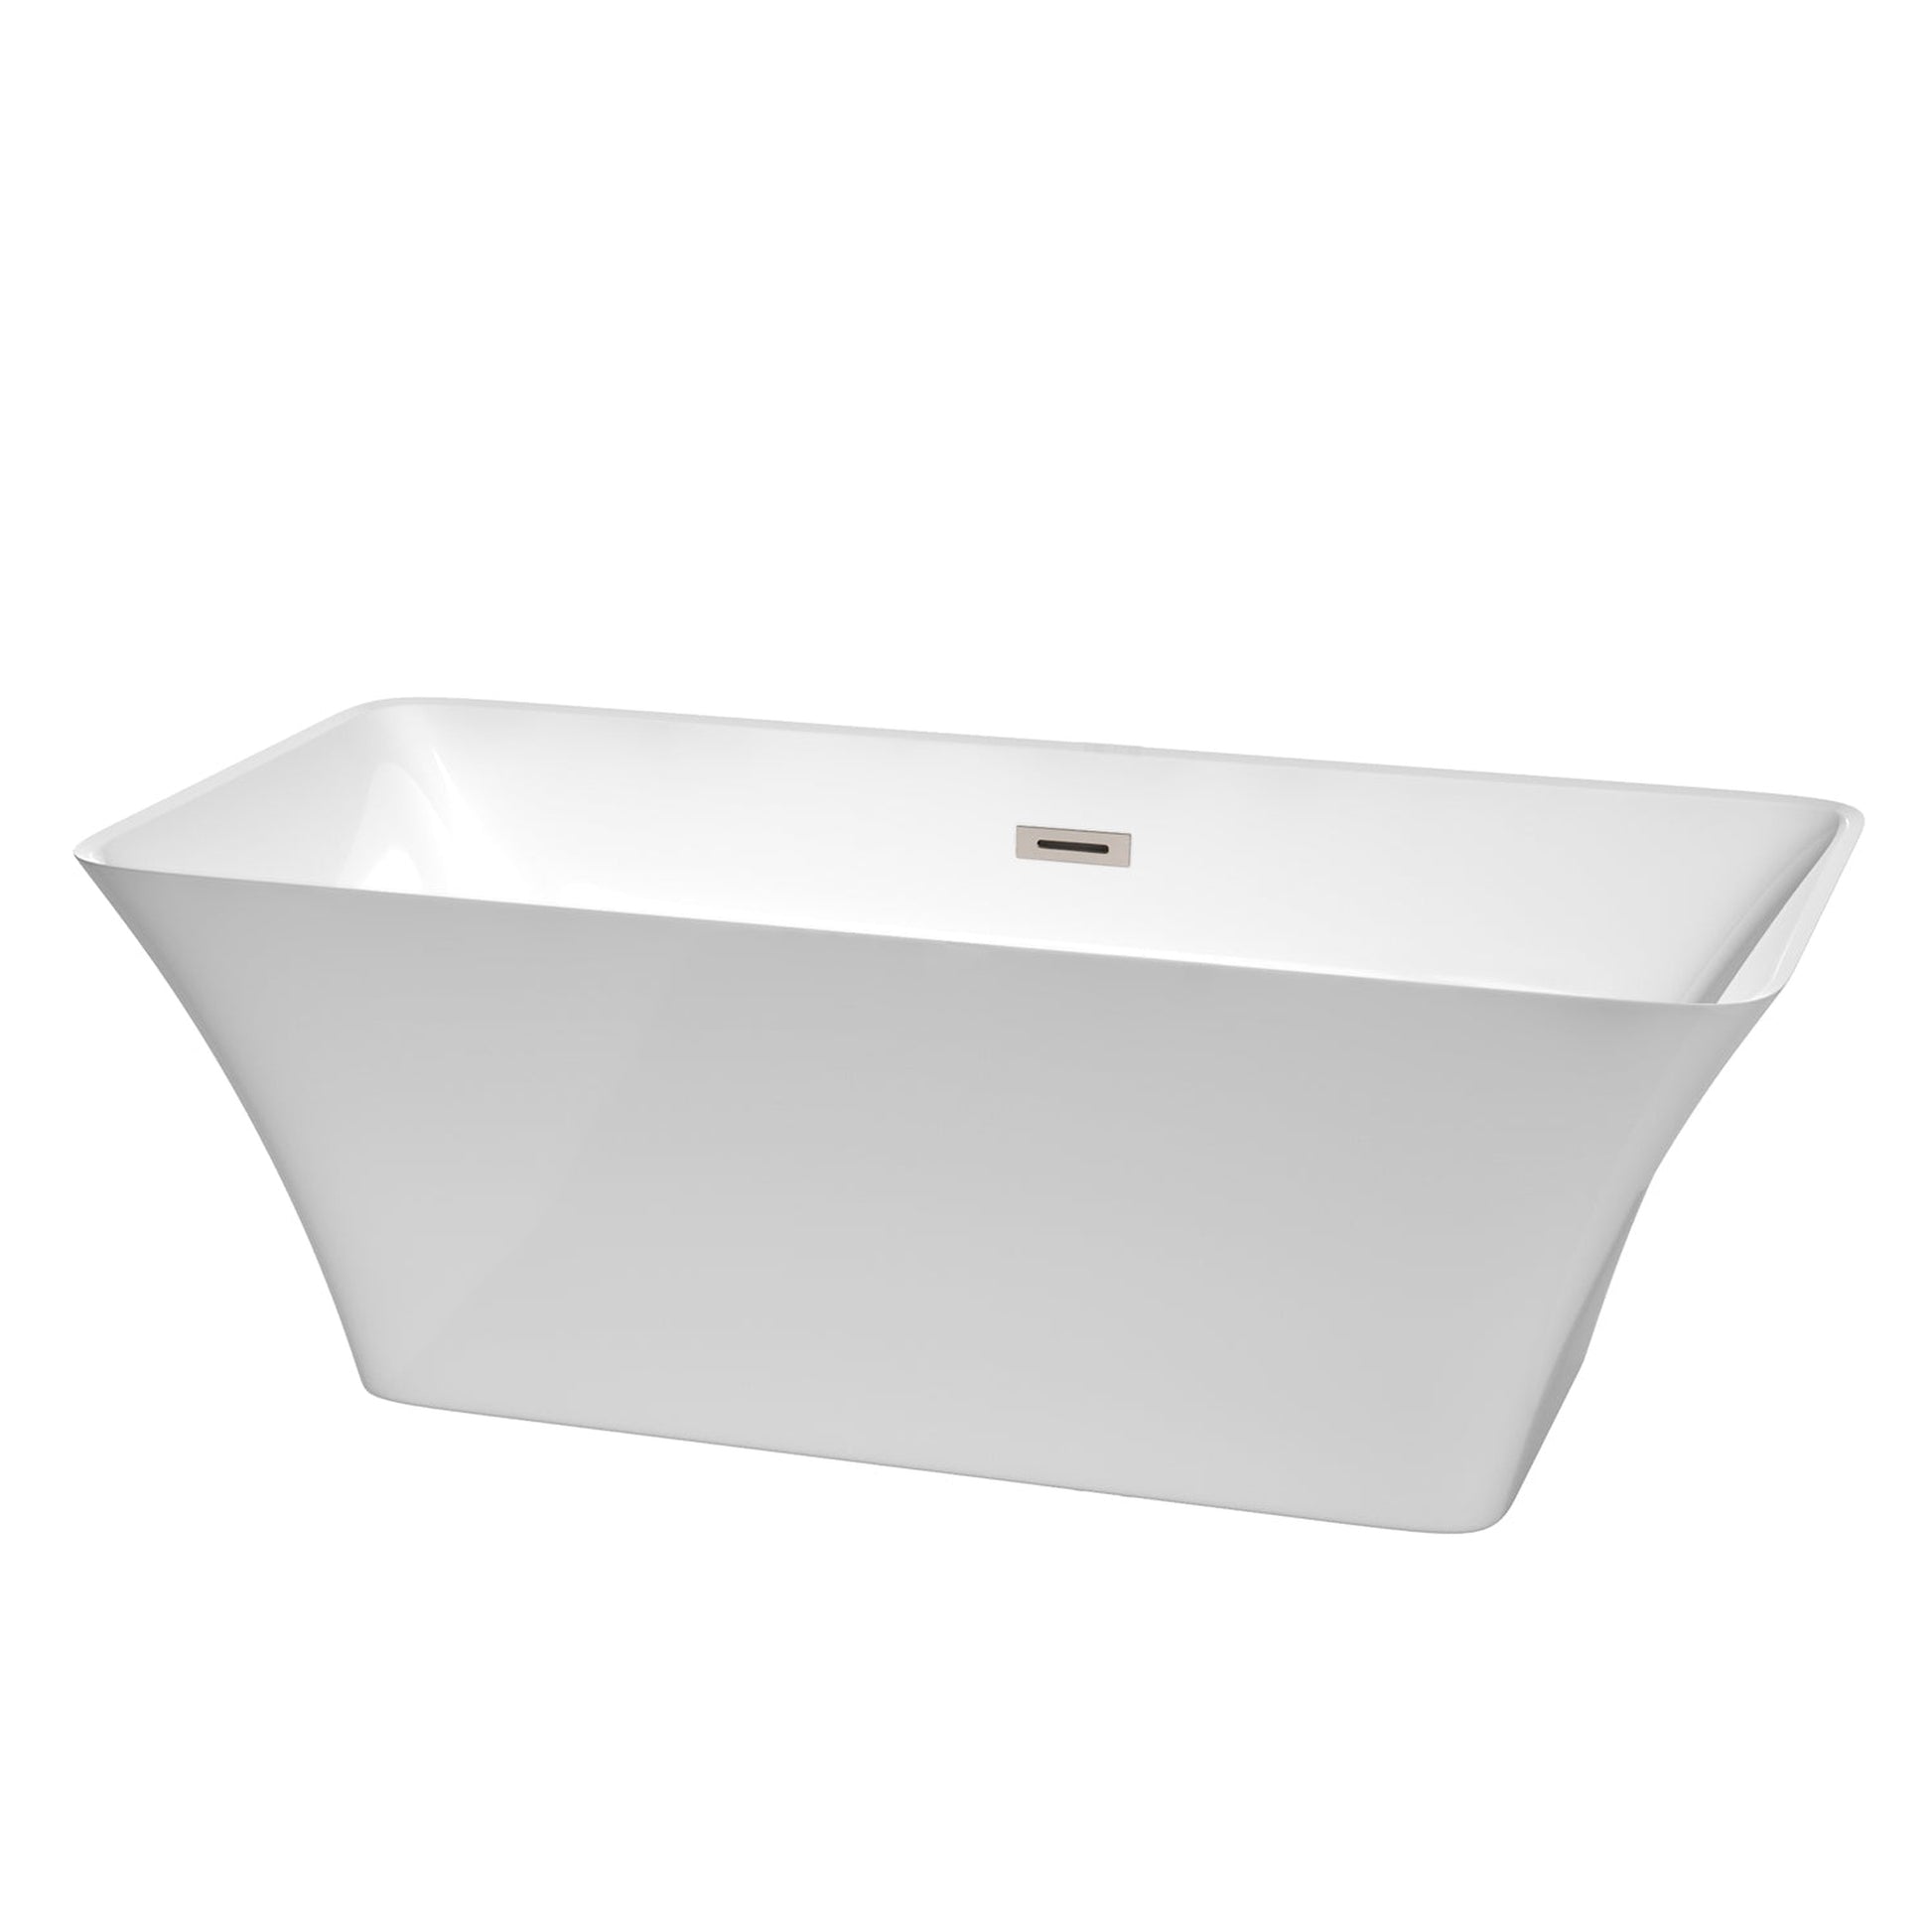 Wyndham Collection Tiffany 67" Freestanding Bathtub in White With Brushed Nickel Drain and Overflow Trim